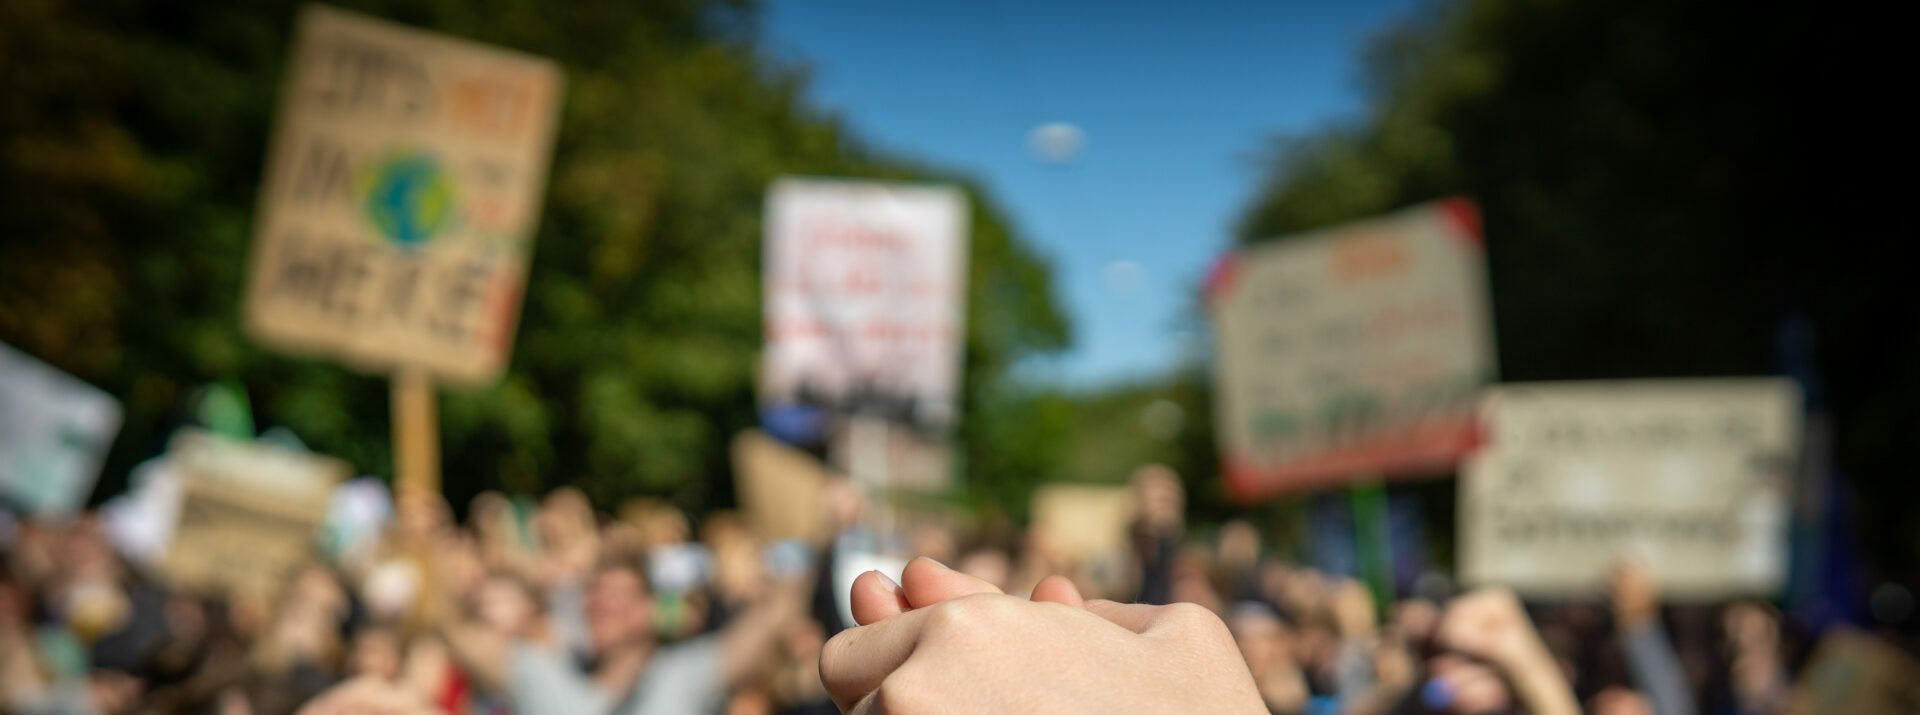 Two people at a rally, joining hands together signaling peace, unity and decisiveness in front of a crowd carrying protest placards with shallow depth of field